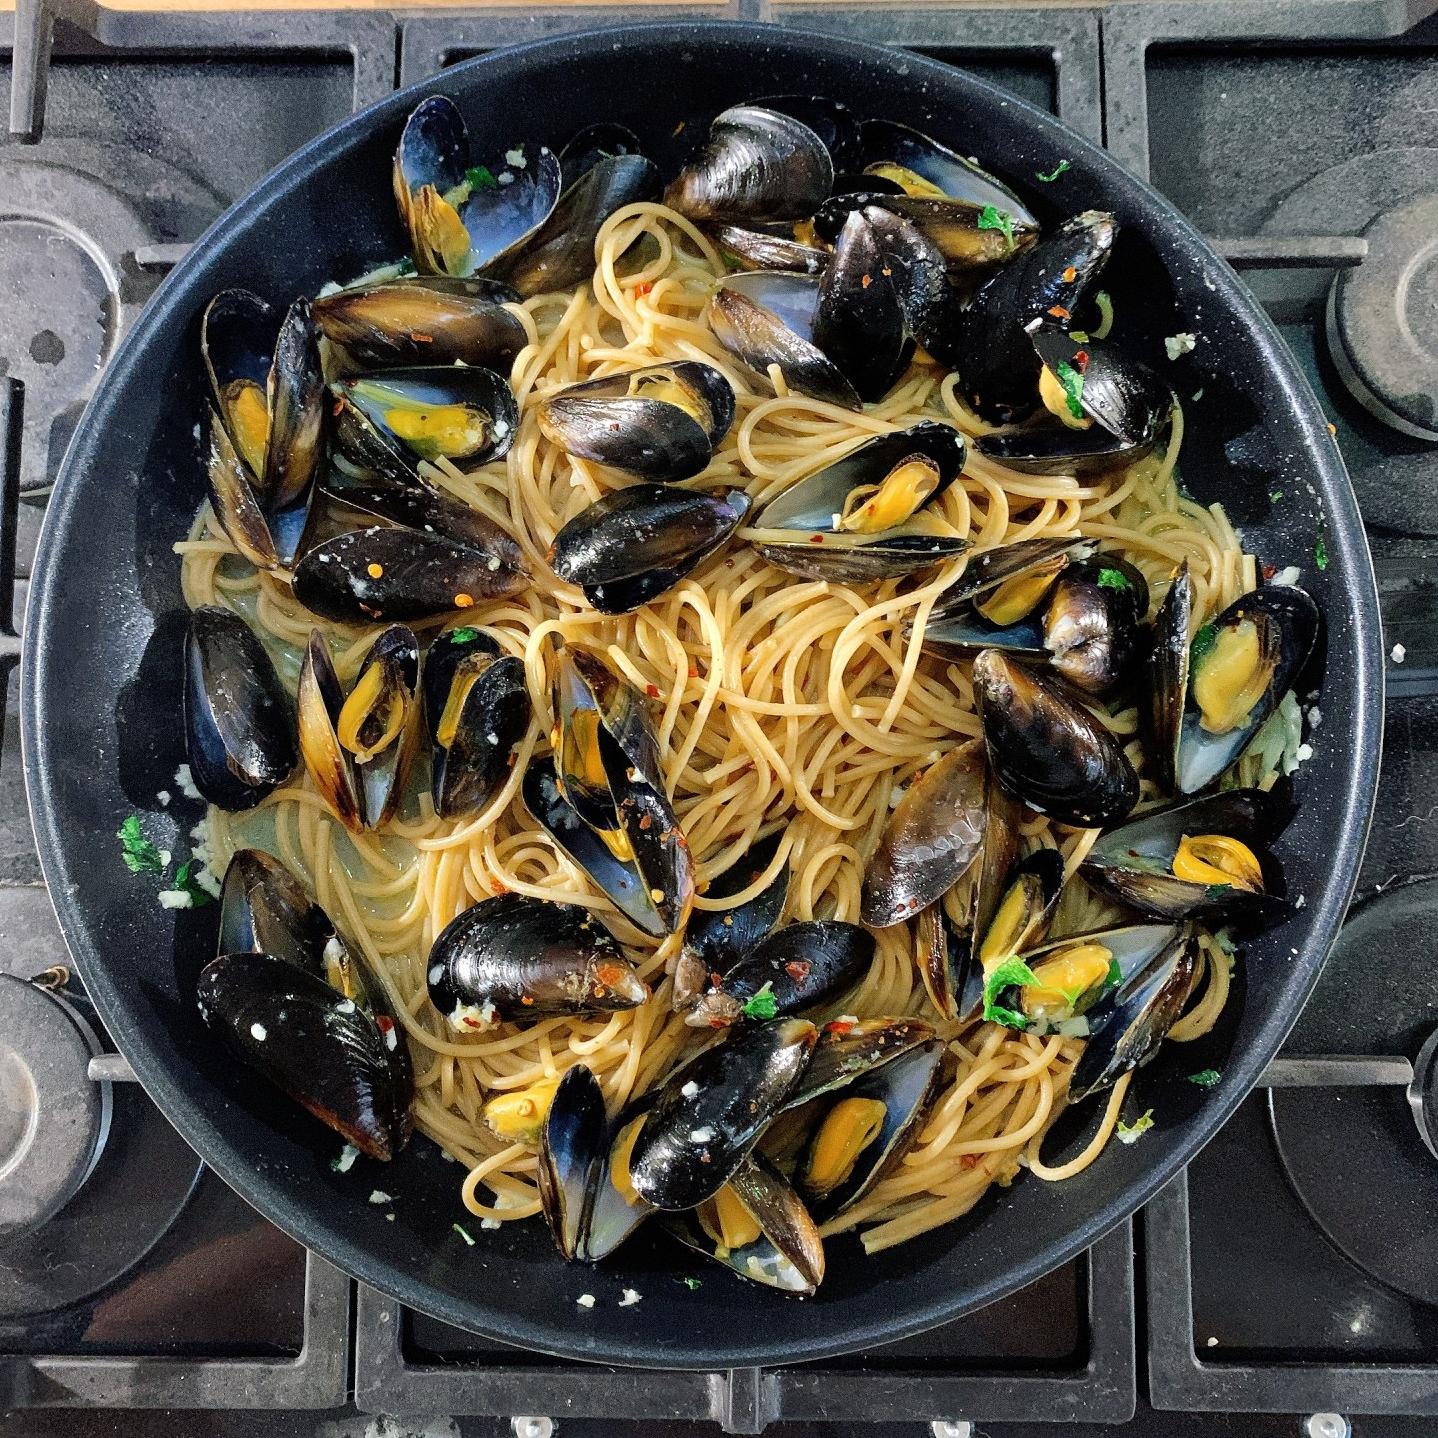  Don't be shellfish, share this amazing spaghetti dish with your loved ones.